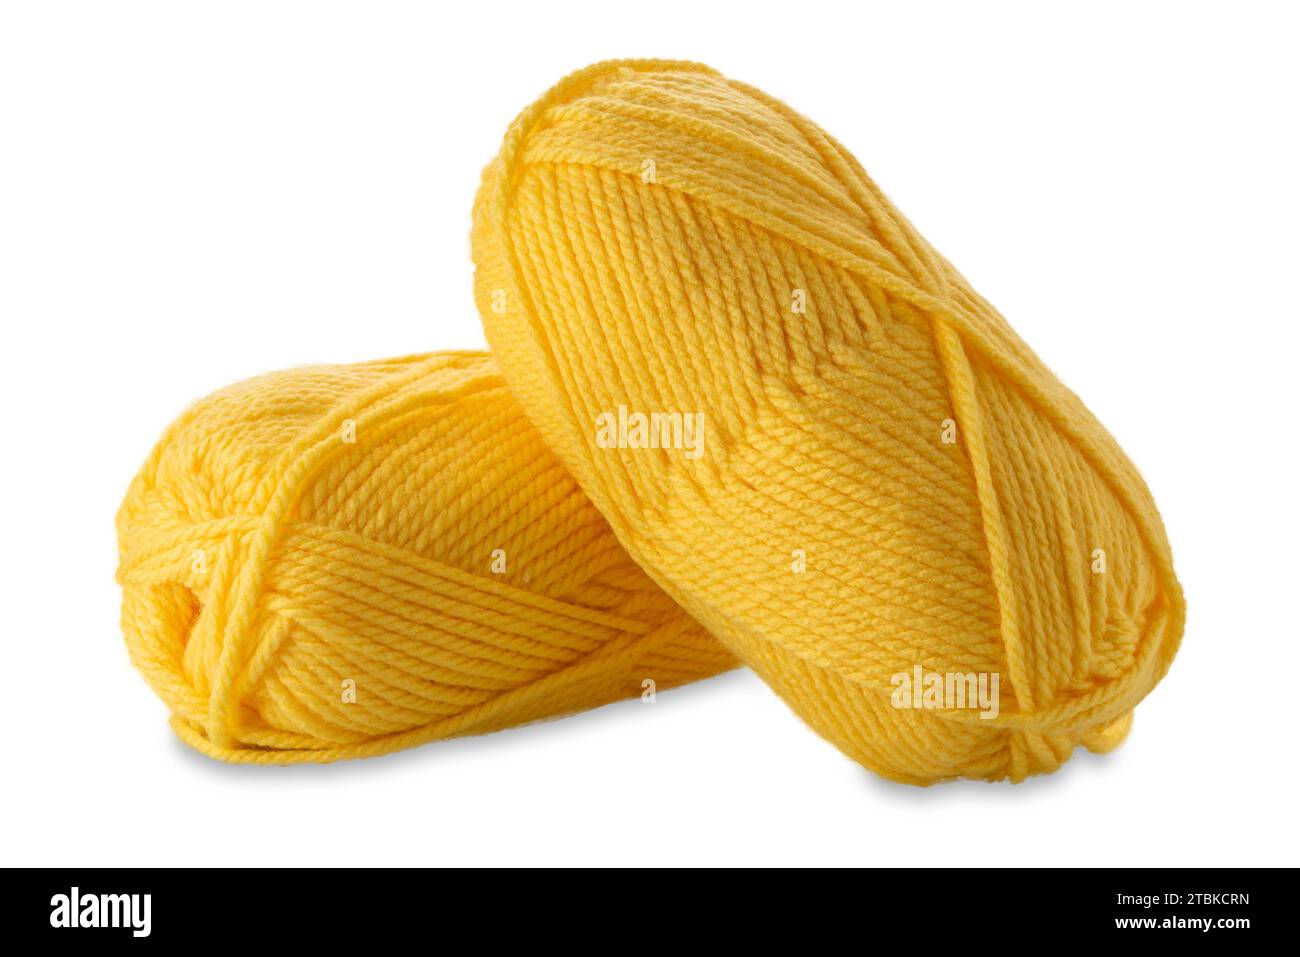 Balls of yellow-colored wool yarn isolated on white with clipping path included Stock Photo